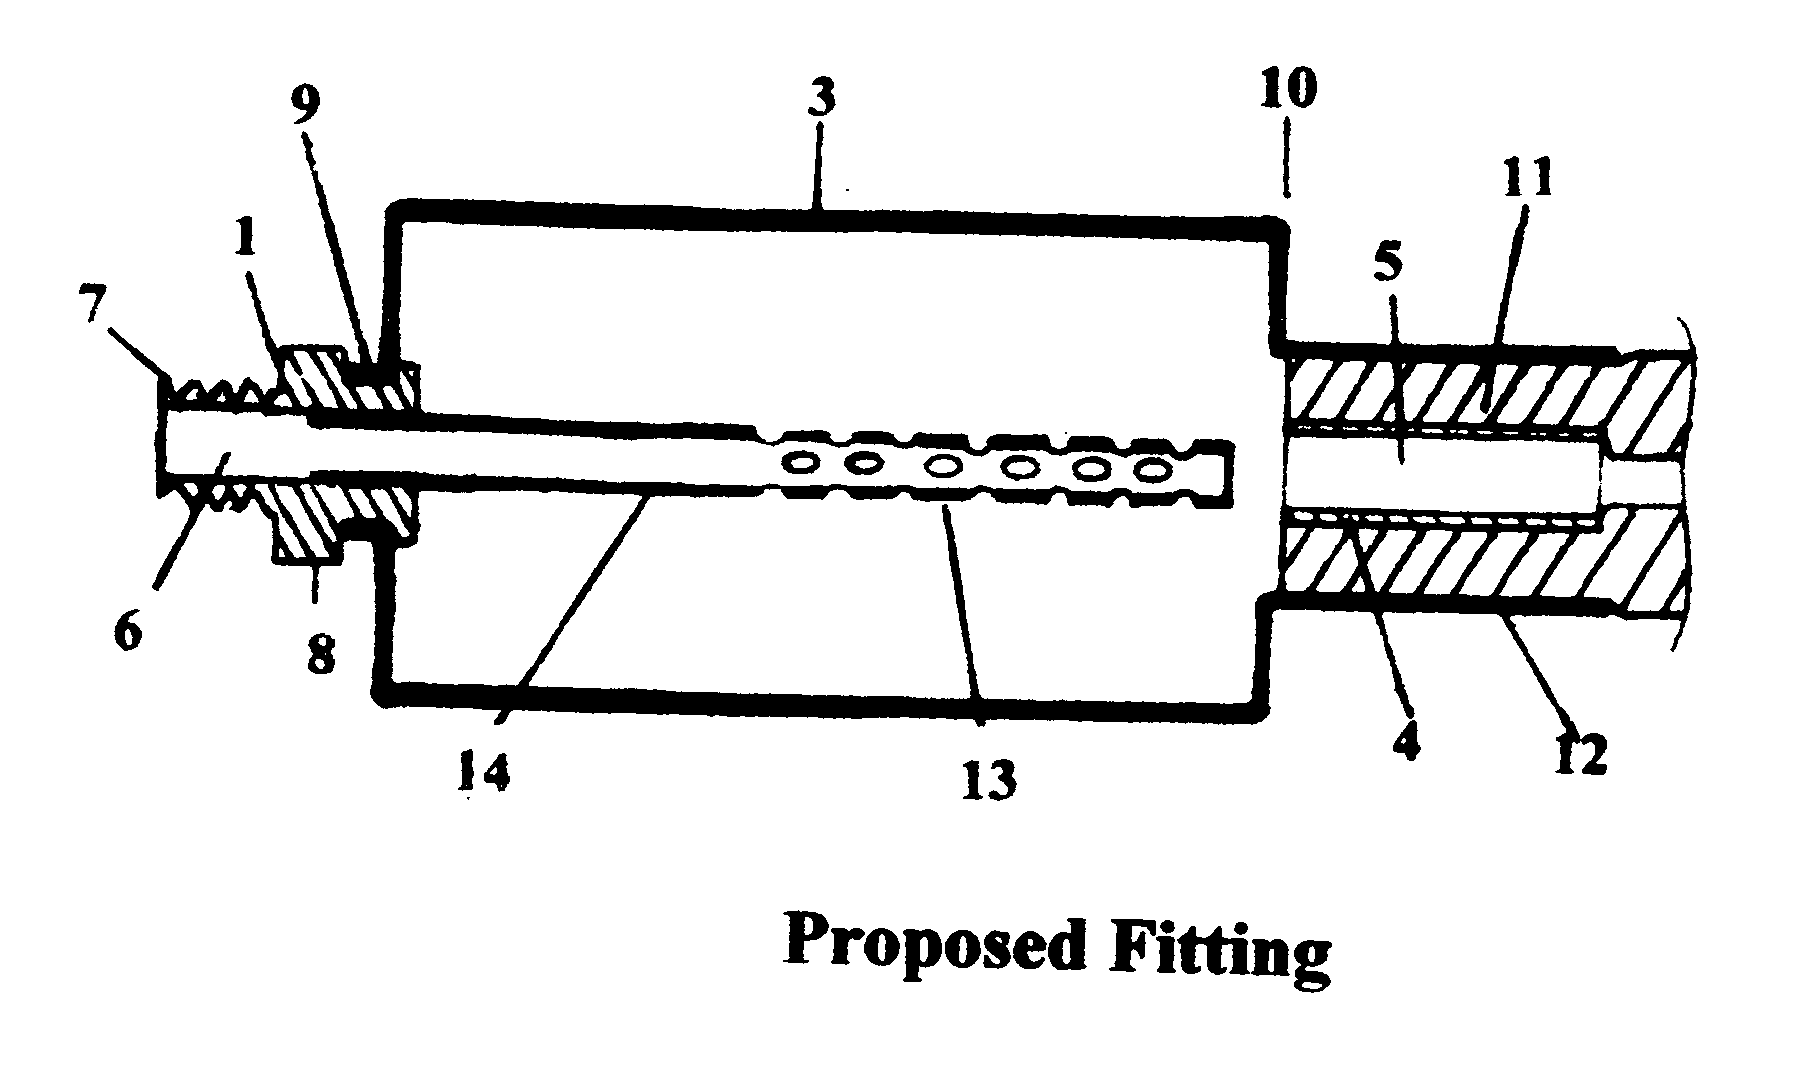 Air hose connector device